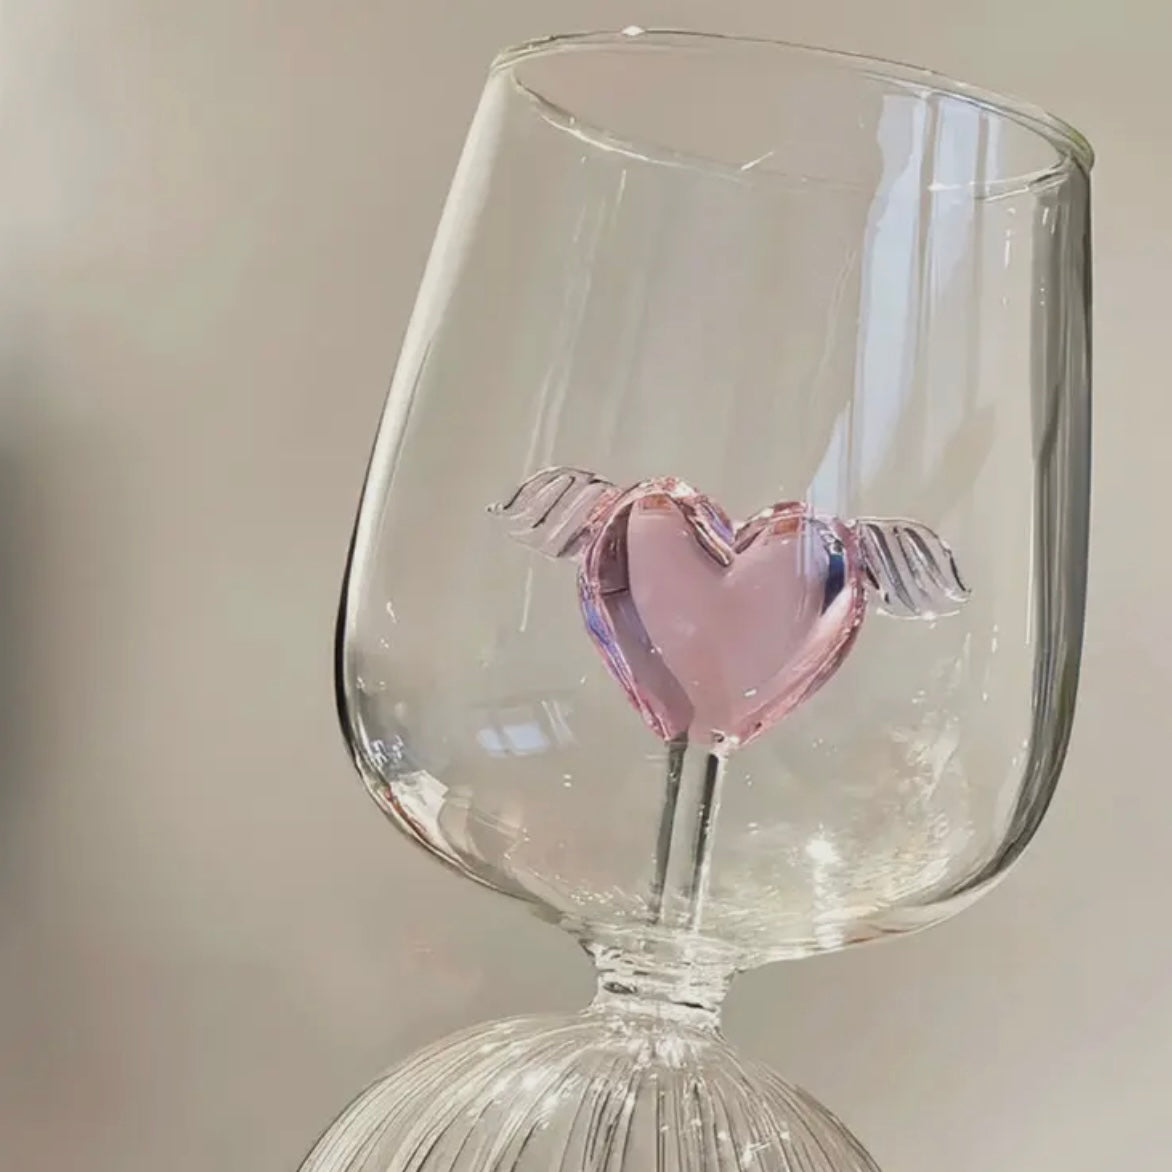 "Cupid" White Wine Glass with Love Heart